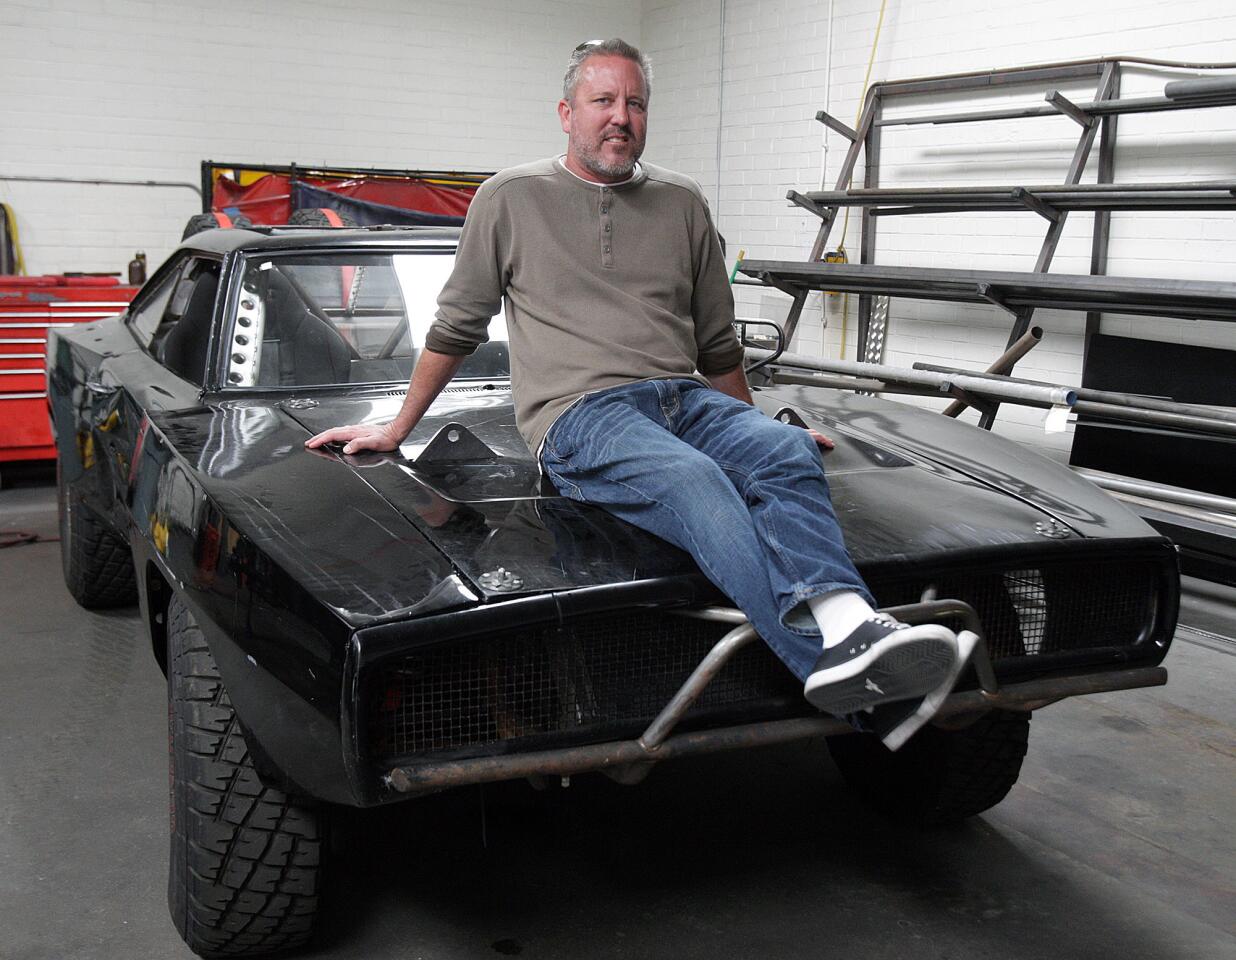 Picture Car Coordinator Dennis McCarthy atop the modified Dodge Charger that was dropped out of an airplane in the movie Fast and Furious 7 at Vehicle Effects, Inc. in Sun Valley on Friday, April 10, 2015. Vehicle Effects, Inc. envisioned and acquired the vehicles used, and how they were used, in several Fast and Furious movies.